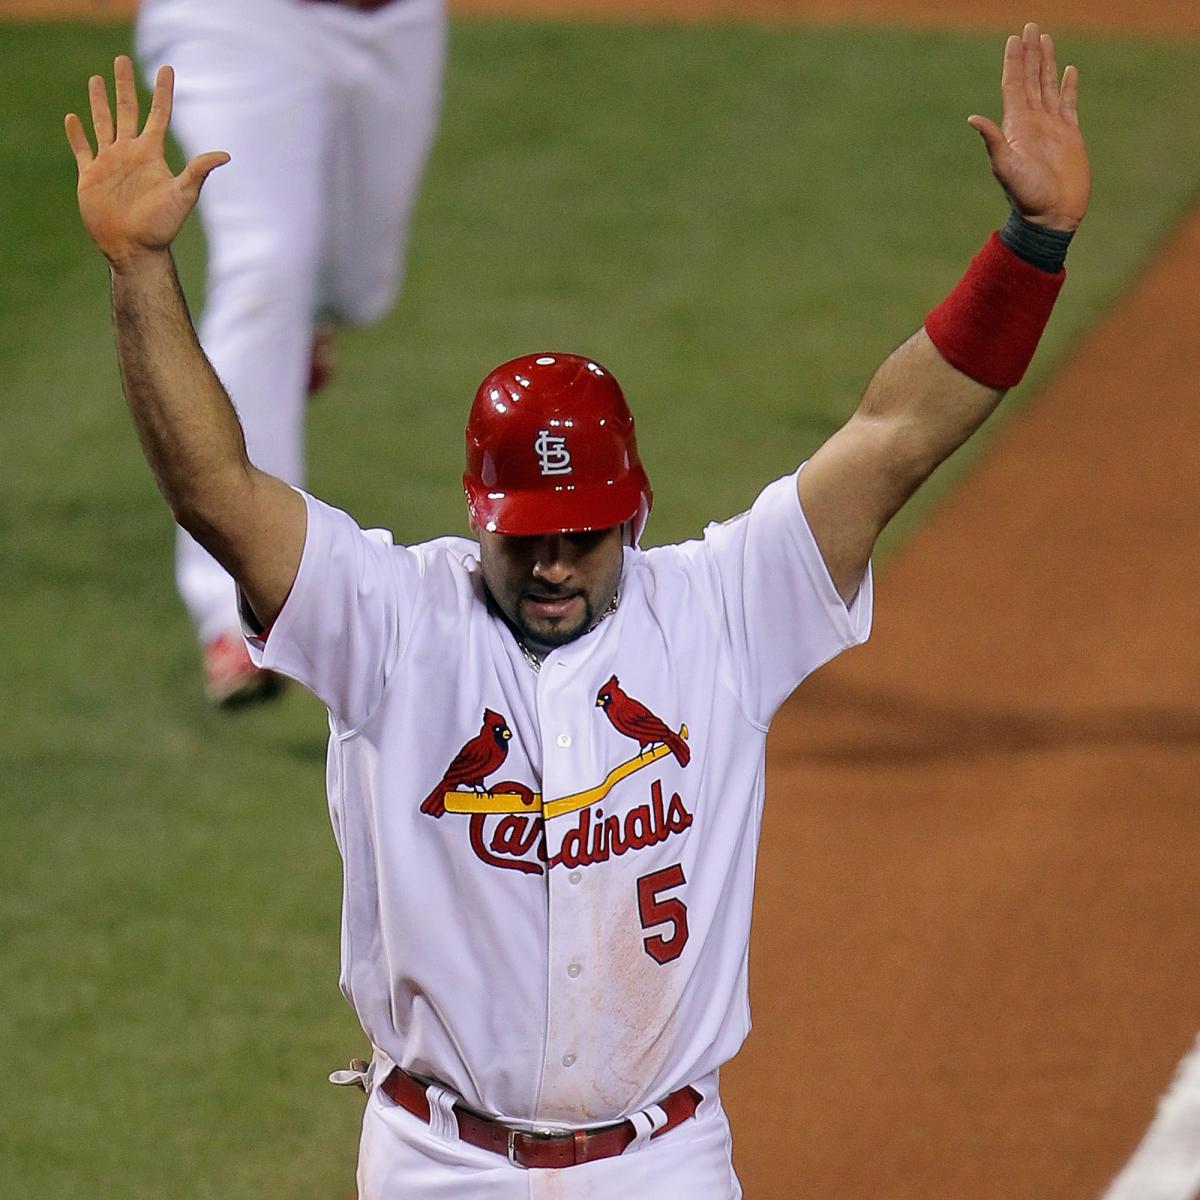 St. Louis Cardinals: 2011 World Series ranked 5th All-time by ESPN